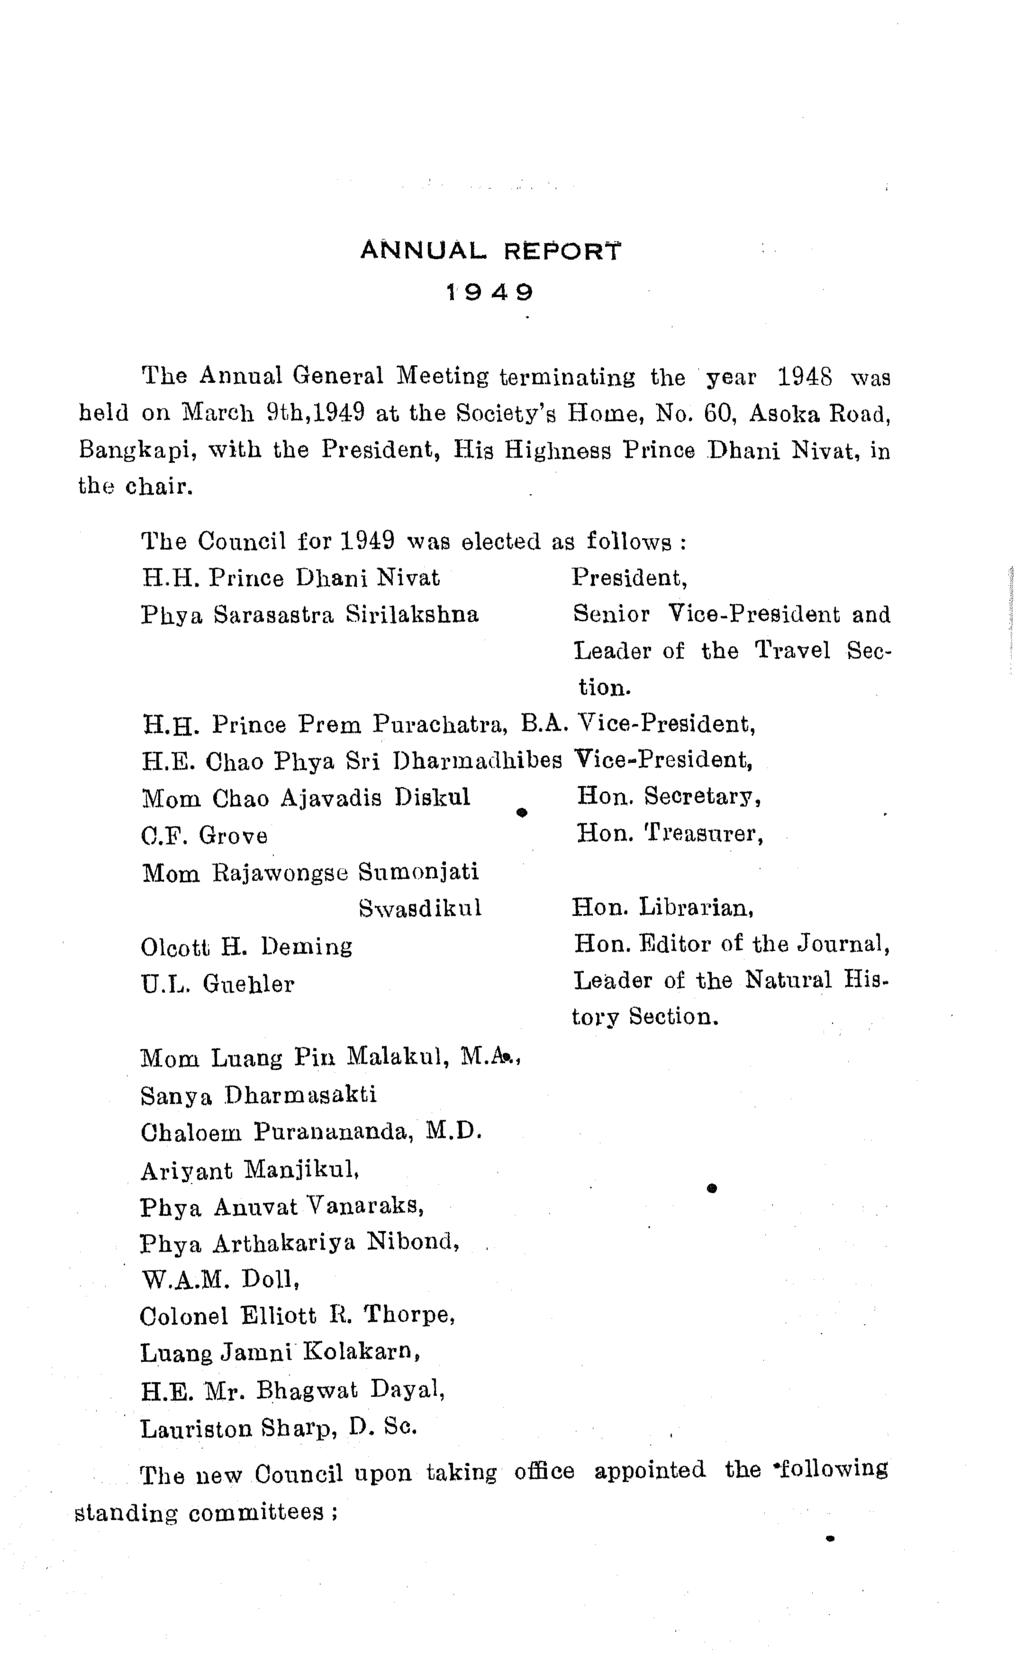 ANNUAL RE:PORi 19 49 The Annual General Meeting terminating the year 1948 was held on March 9th,1949 at the Society's Home, No.